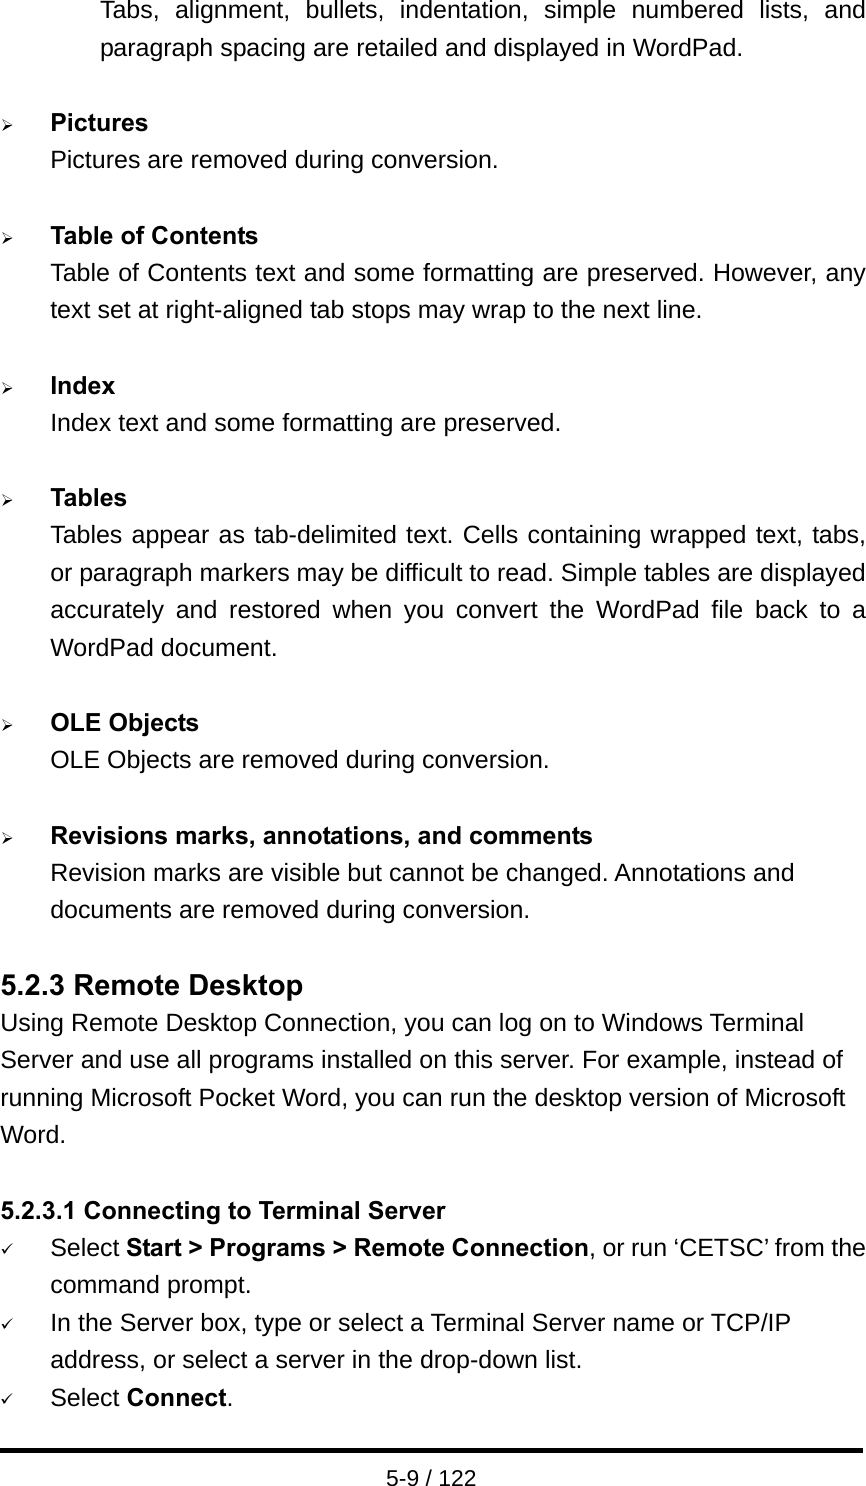  5-9 / 122 Tabs, alignment, bullets, indentation, simple numbered lists, and paragraph spacing are retailed and displayed in WordPad.  ¾ Pictures Pictures are removed during conversion.  ¾ Table of Contents Table of Contents text and some formatting are preserved. However, any text set at right-aligned tab stops may wrap to the next line.  ¾ Index Index text and some formatting are preserved.  ¾ Tables Tables appear as tab-delimited text. Cells containing wrapped text, tabs, or paragraph markers may be difficult to read. Simple tables are displayed accurately and restored when you convert the WordPad file back to a WordPad document.  ¾ OLE Objects OLE Objects are removed during conversion.  ¾ Revisions marks, annotations, and comments Revision marks are visible but cannot be changed. Annotations and documents are removed during conversion.  5.2.3 Remote Desktop Using Remote Desktop Connection, you can log on to Windows Terminal Server and use all programs installed on this server. For example, instead of running Microsoft Pocket Word, you can run the desktop version of Microsoft Word.  5.2.3.1 Connecting to Terminal Server 9 Select Start &gt; Programs &gt; Remote Connection, or run ‘CETSC’ from the command prompt. 9 In the Server box, type or select a Terminal Server name or TCP/IP address, or select a server in the drop-down list. 9 Select Connect. 